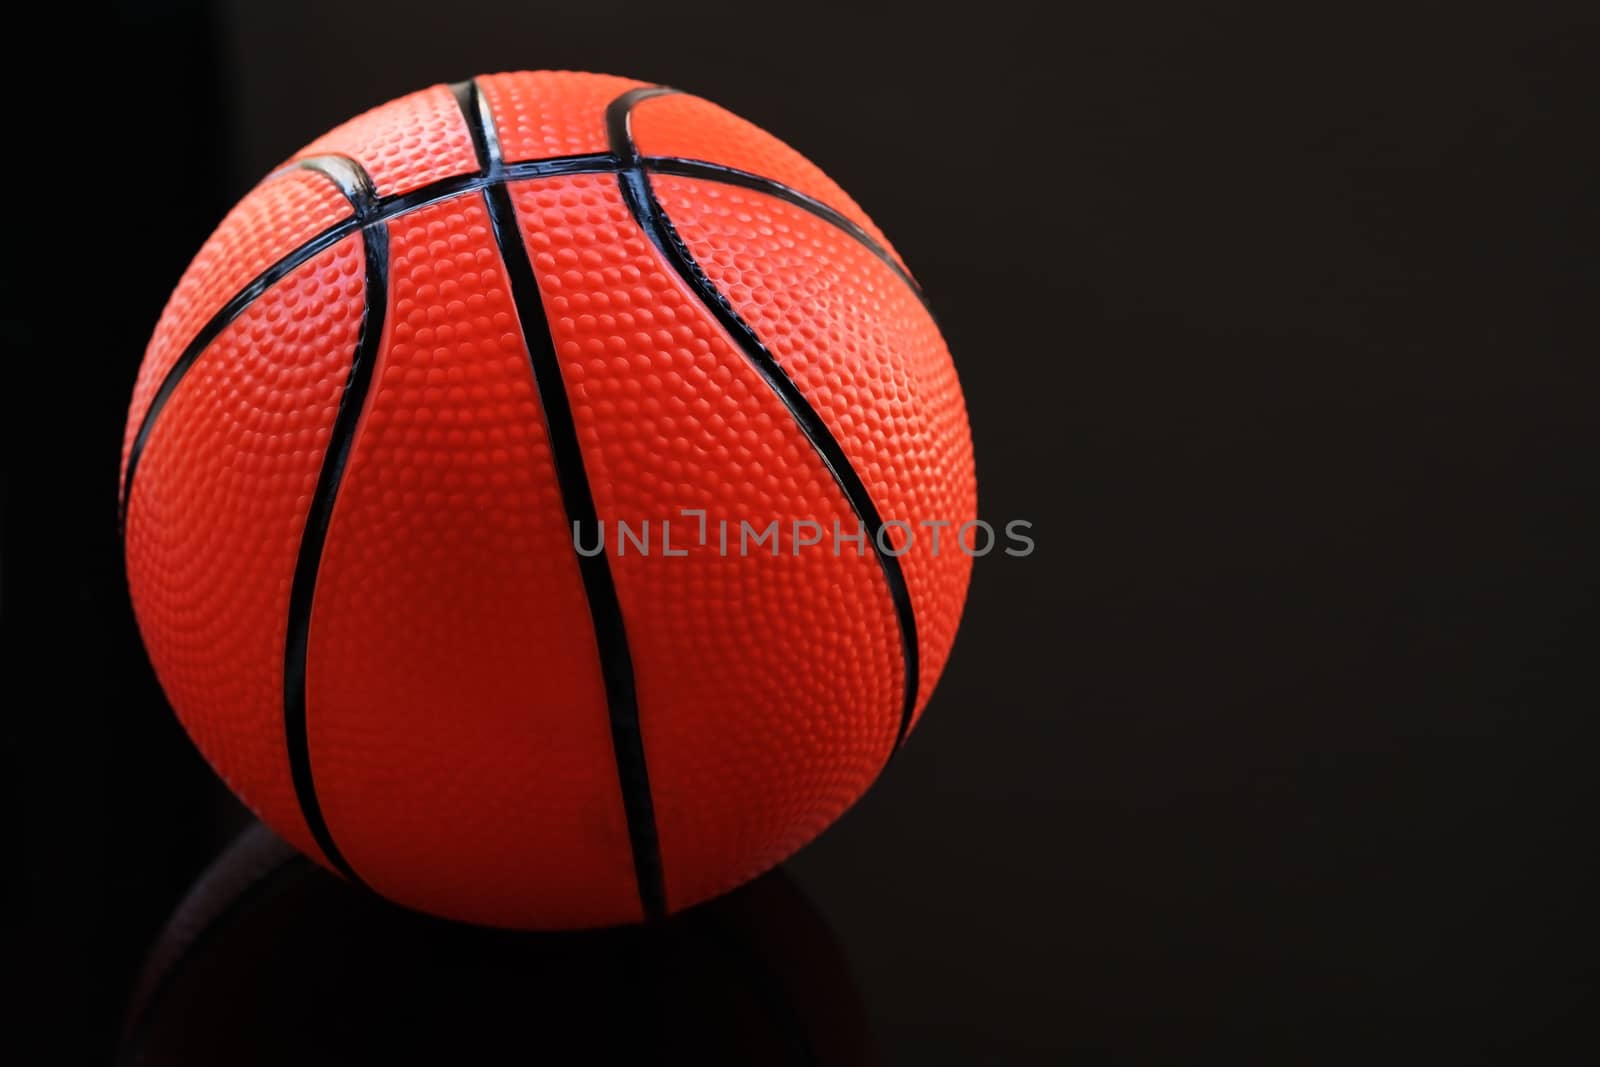 Basketball on a black background as a sports and fitness activity